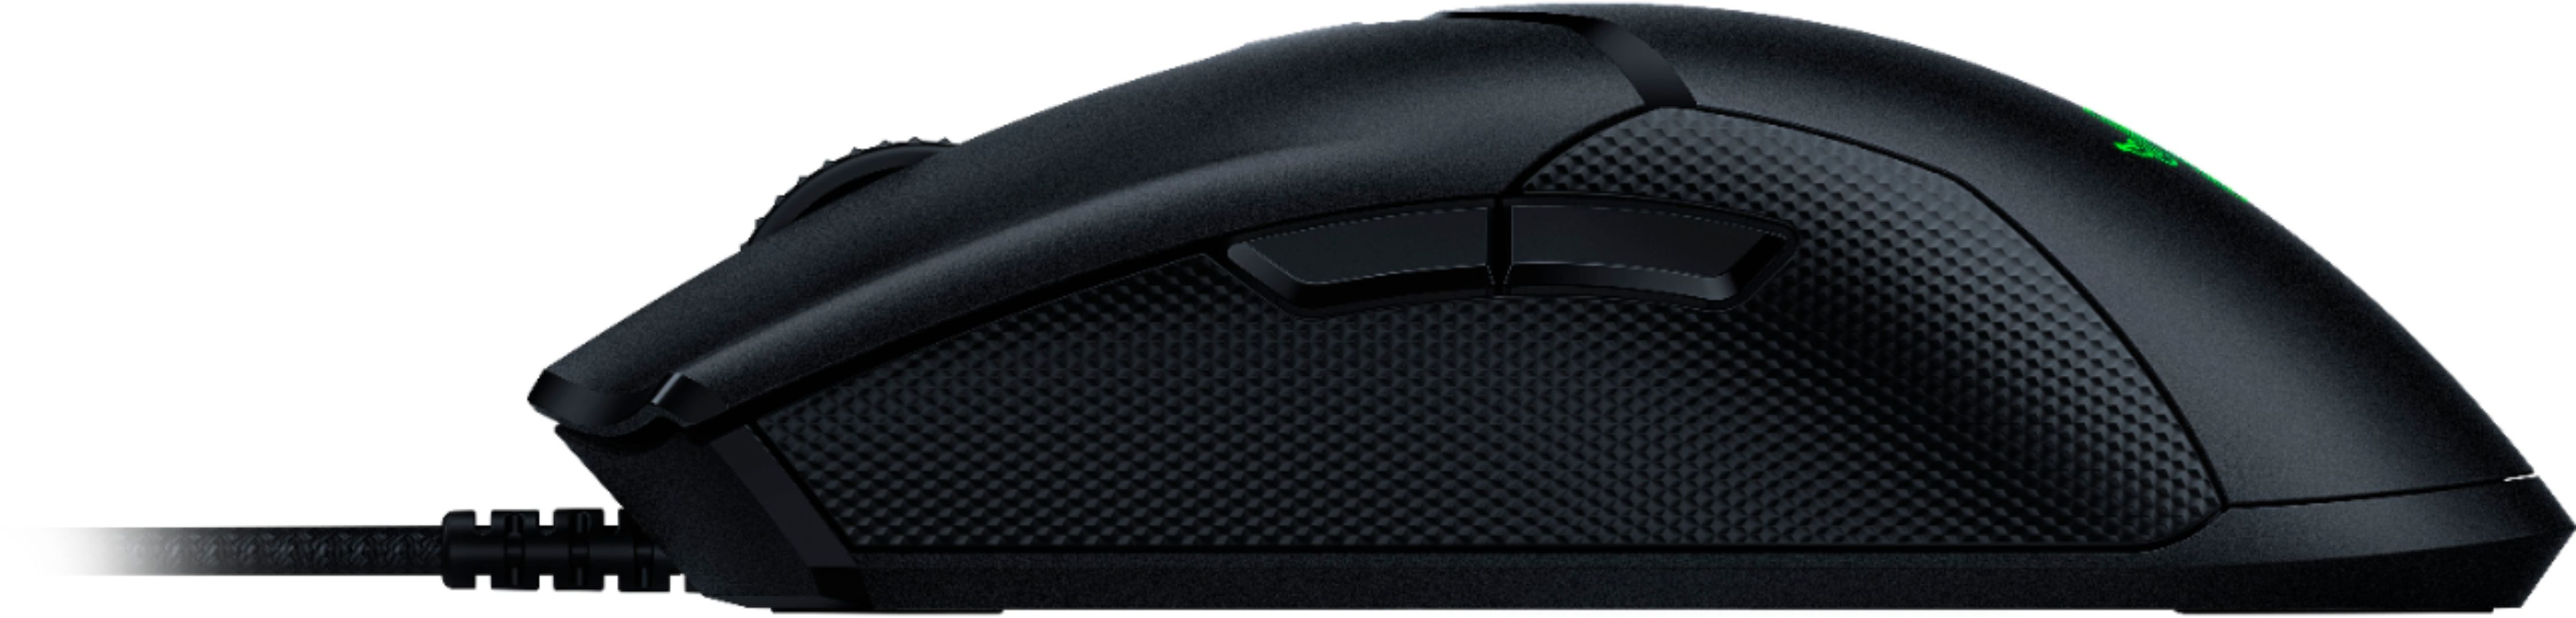 Left View: Razer - Viper 8KHz Lightweight Wired Optical Gaming Ambidextrous Mouse with Chroma RGB Lighting - Black